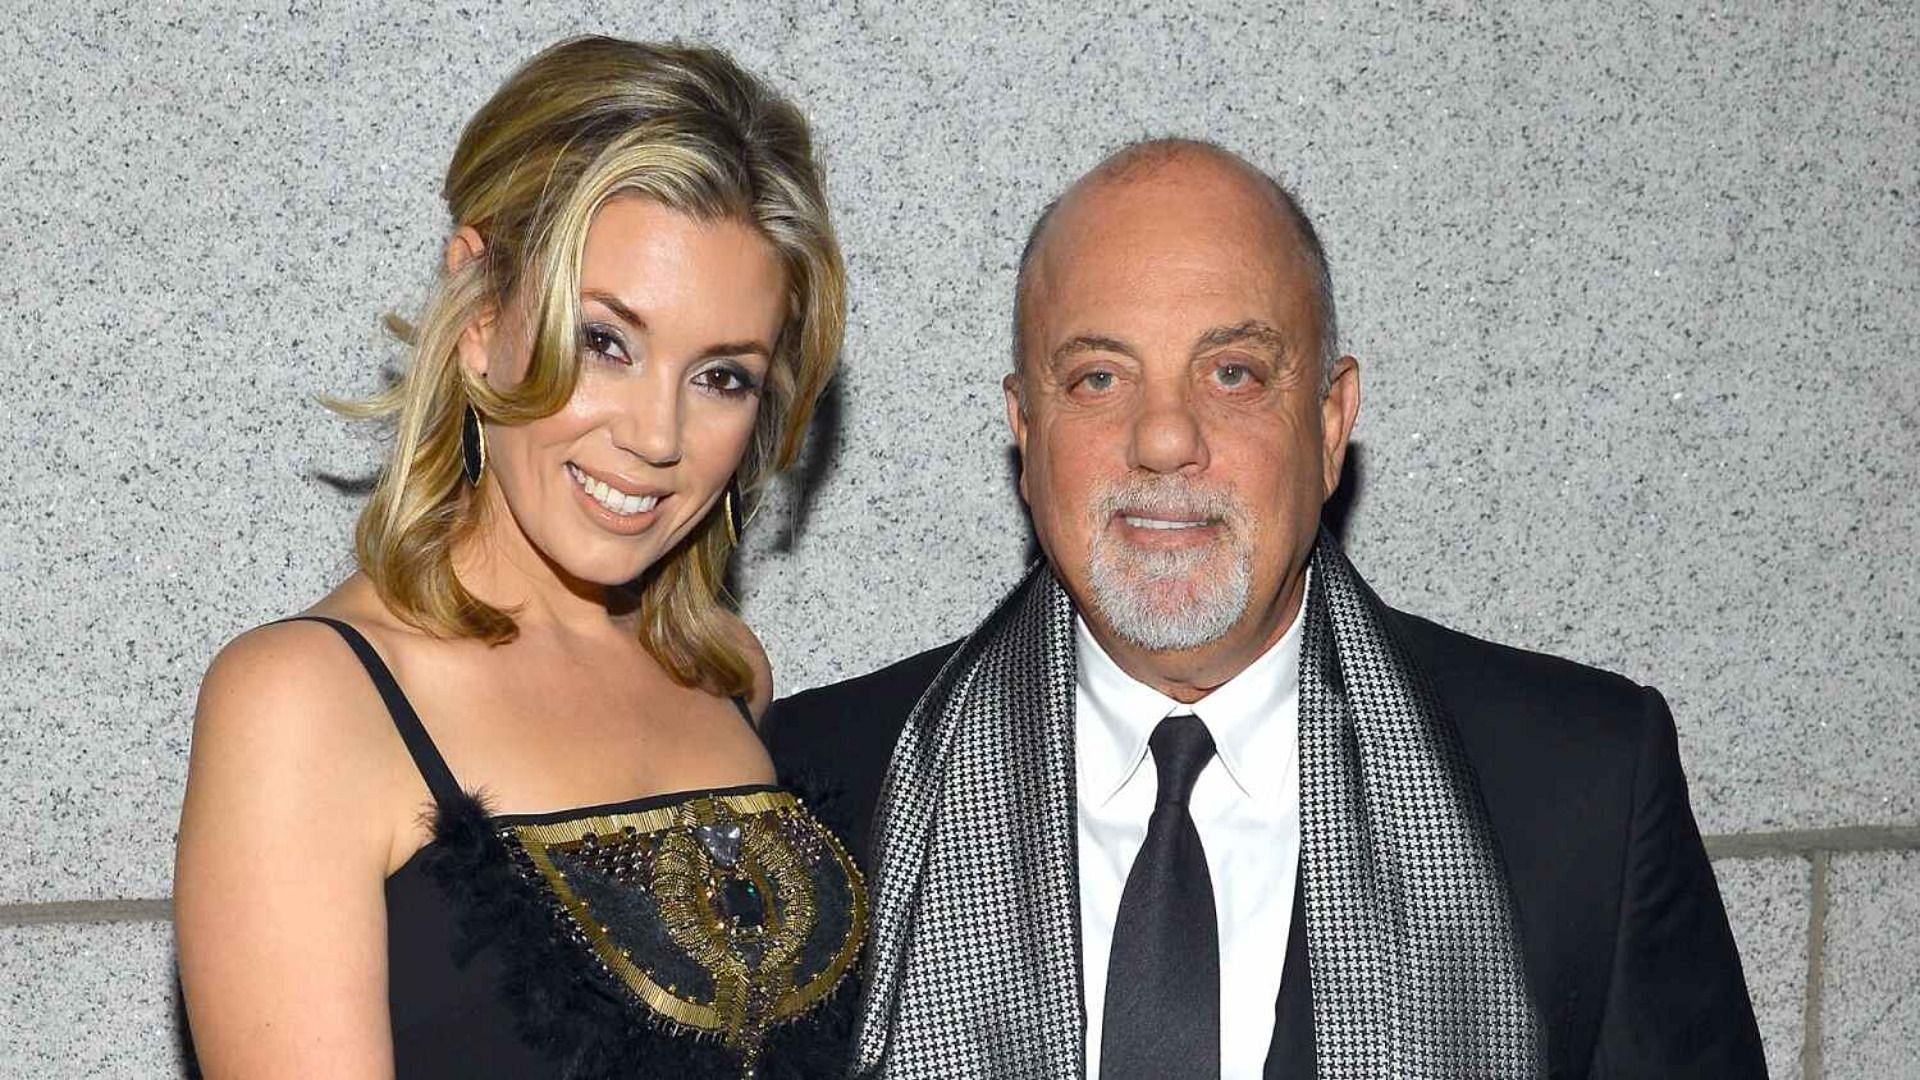 Billy Joel and Alexis Roderick (Image via Larry Busacca/Getty Images)